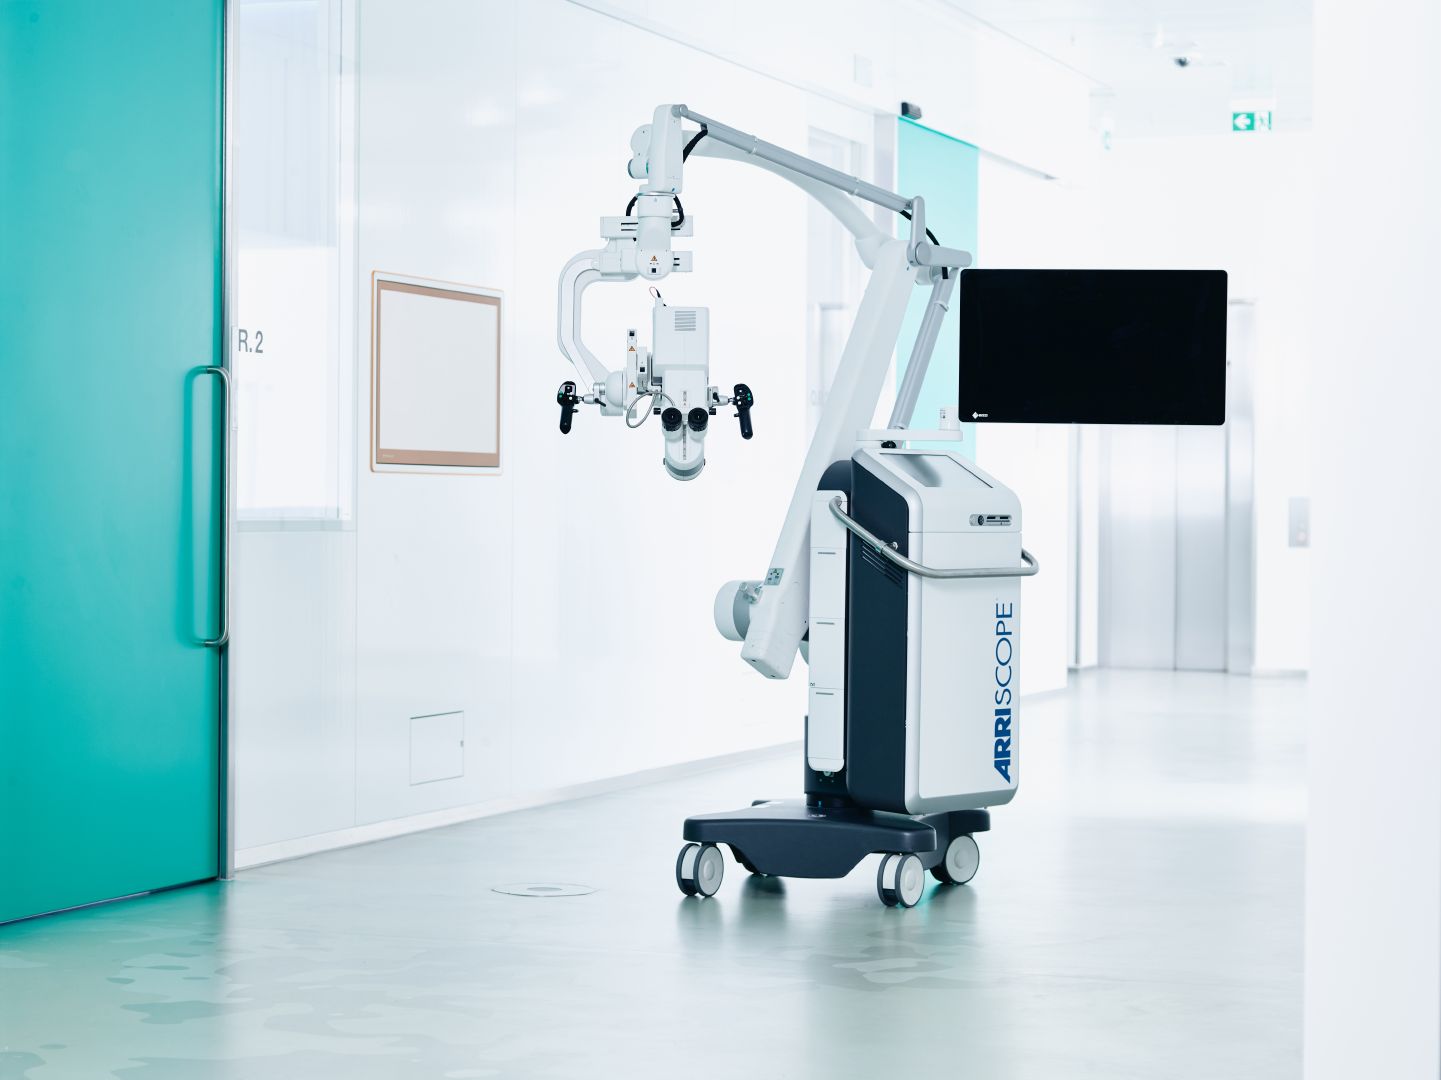 Development of the short-wave infrared microscope in the project is based on the Arriscope surgical microscope from Munich Surgical Imaging. The device is approved for all applications in ear, nose, and throat surgery. Courtesy of Munich Surgical Imaging